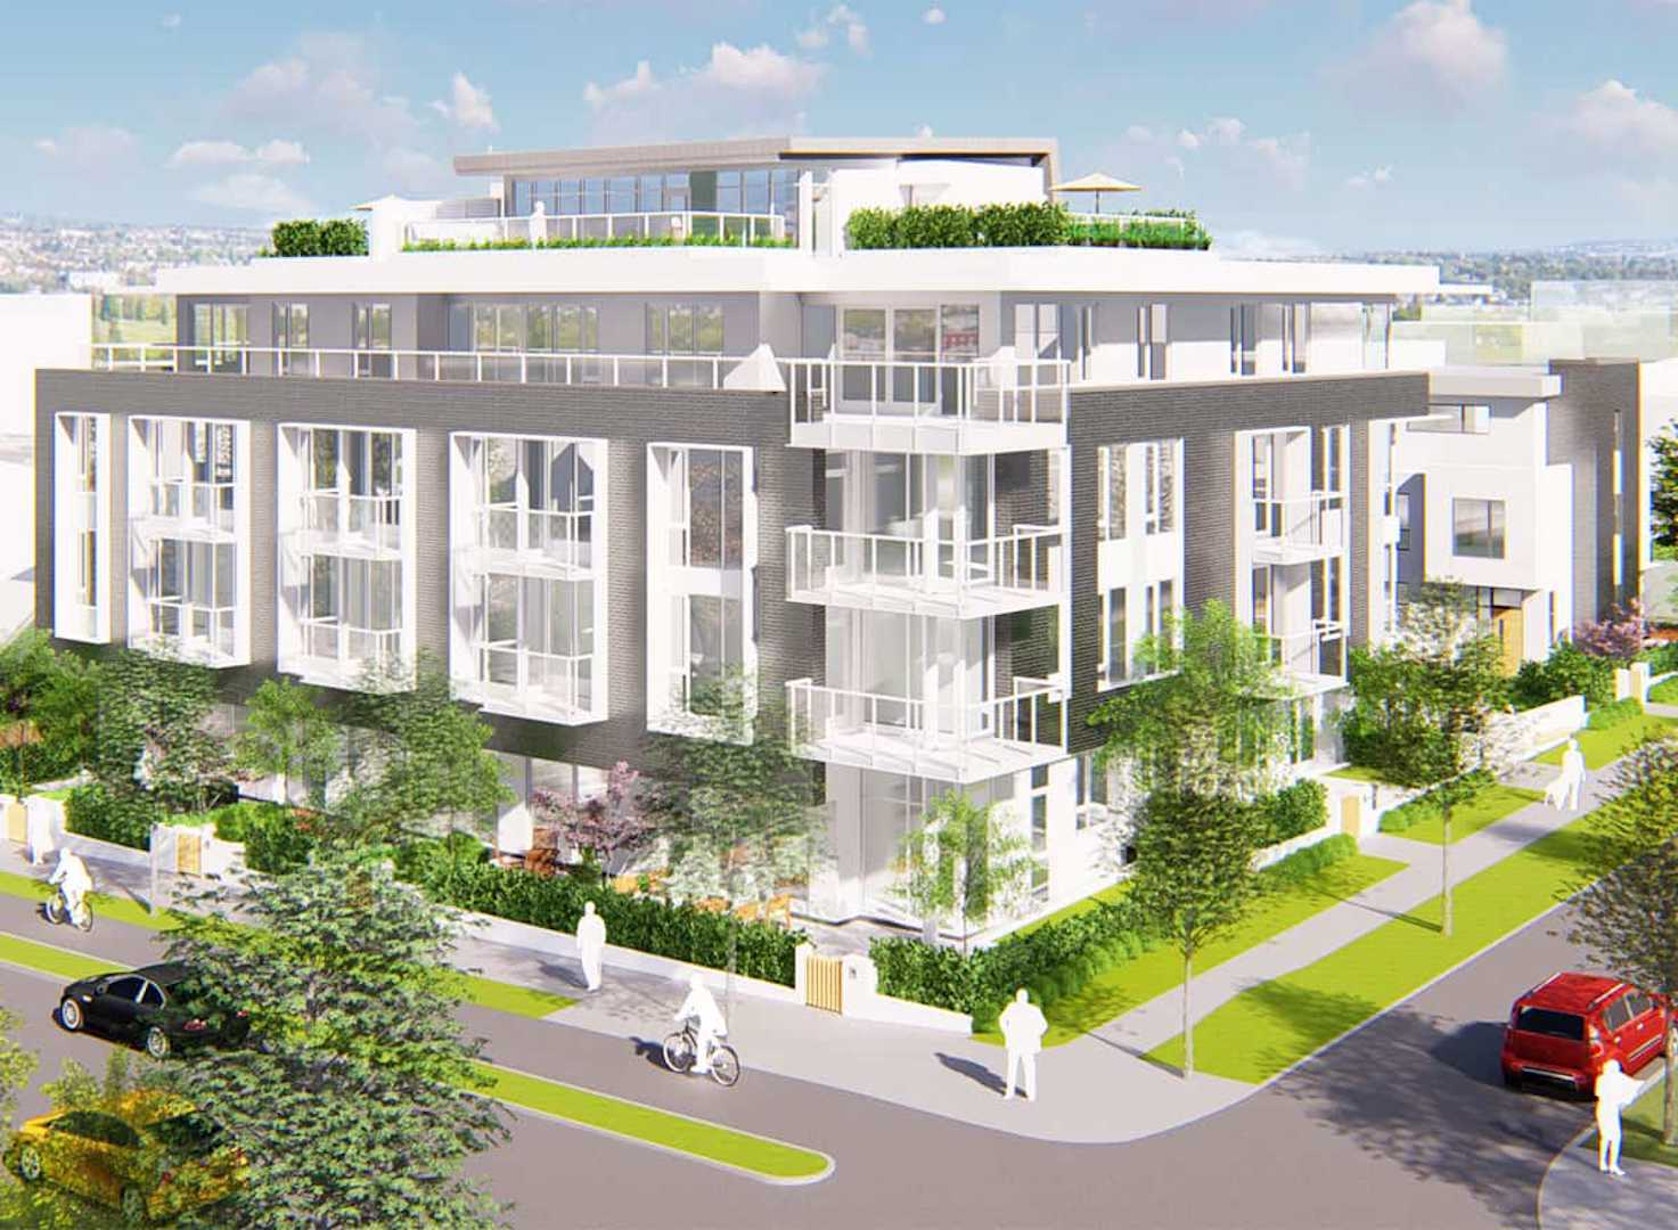 A Cambie Corridor residential development consisting of 31 condominiums and 5 townhomes.